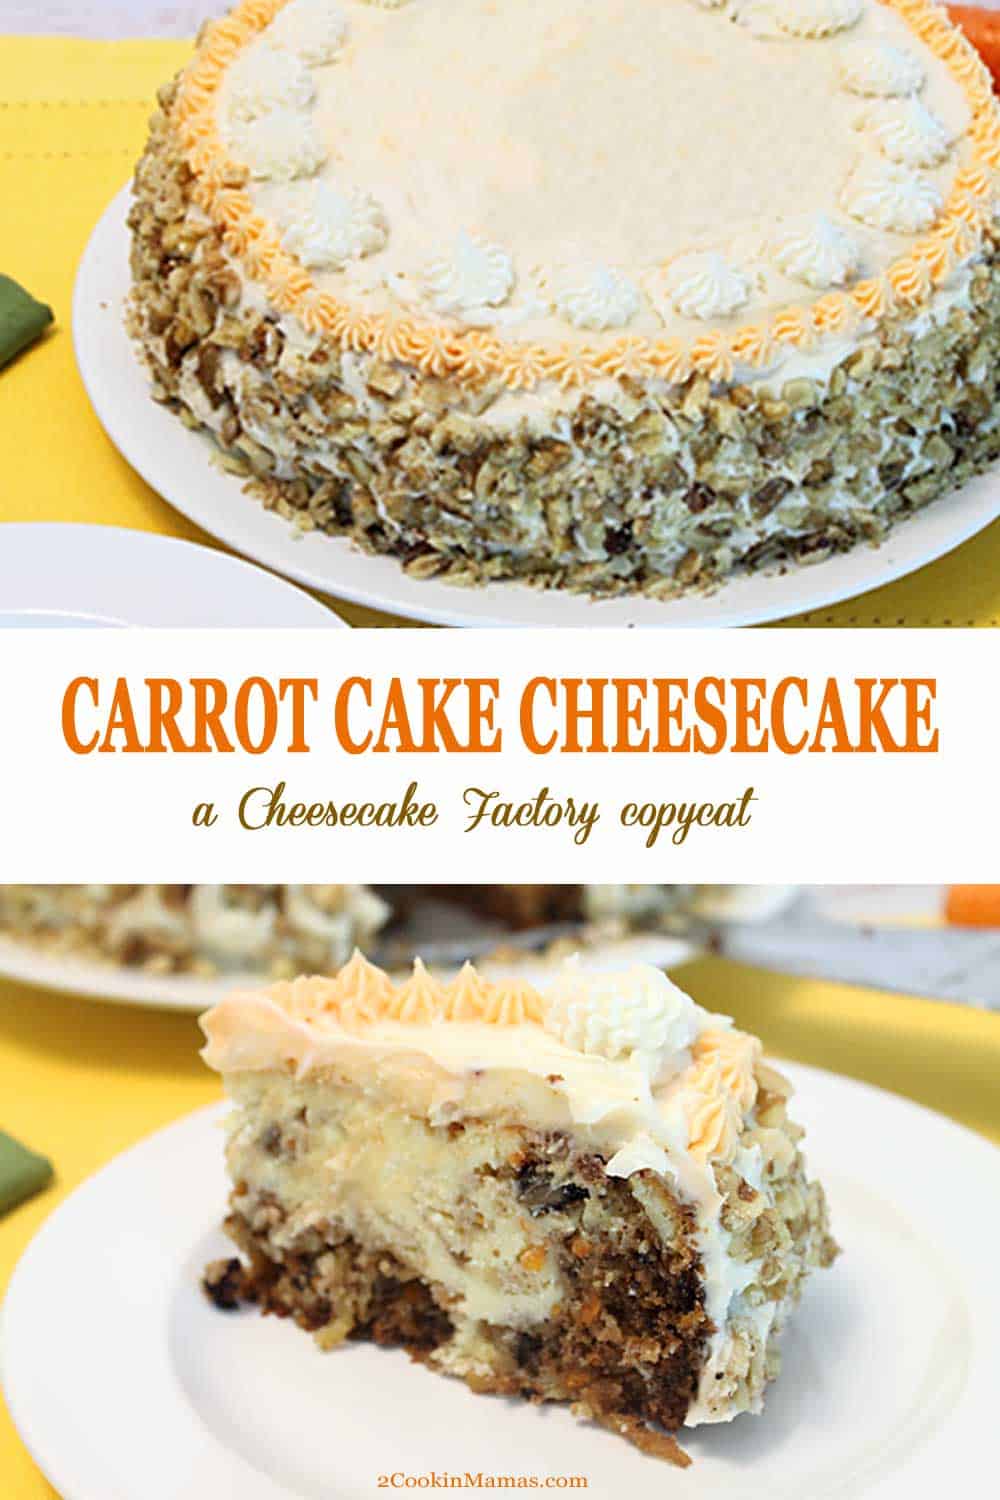 Carrot Cake Cheesecake | 2 Cookin Mamas This copycat Carrot Cake Cheesecake, full of moist carrot cake & rich cheesecake, is just as delicious as the Cheesecake Factory original. Yum! #cheesecake #carrotcake #cheesecakefactorycopycat #carrots #dessert #recipe #Easter #MothersDay